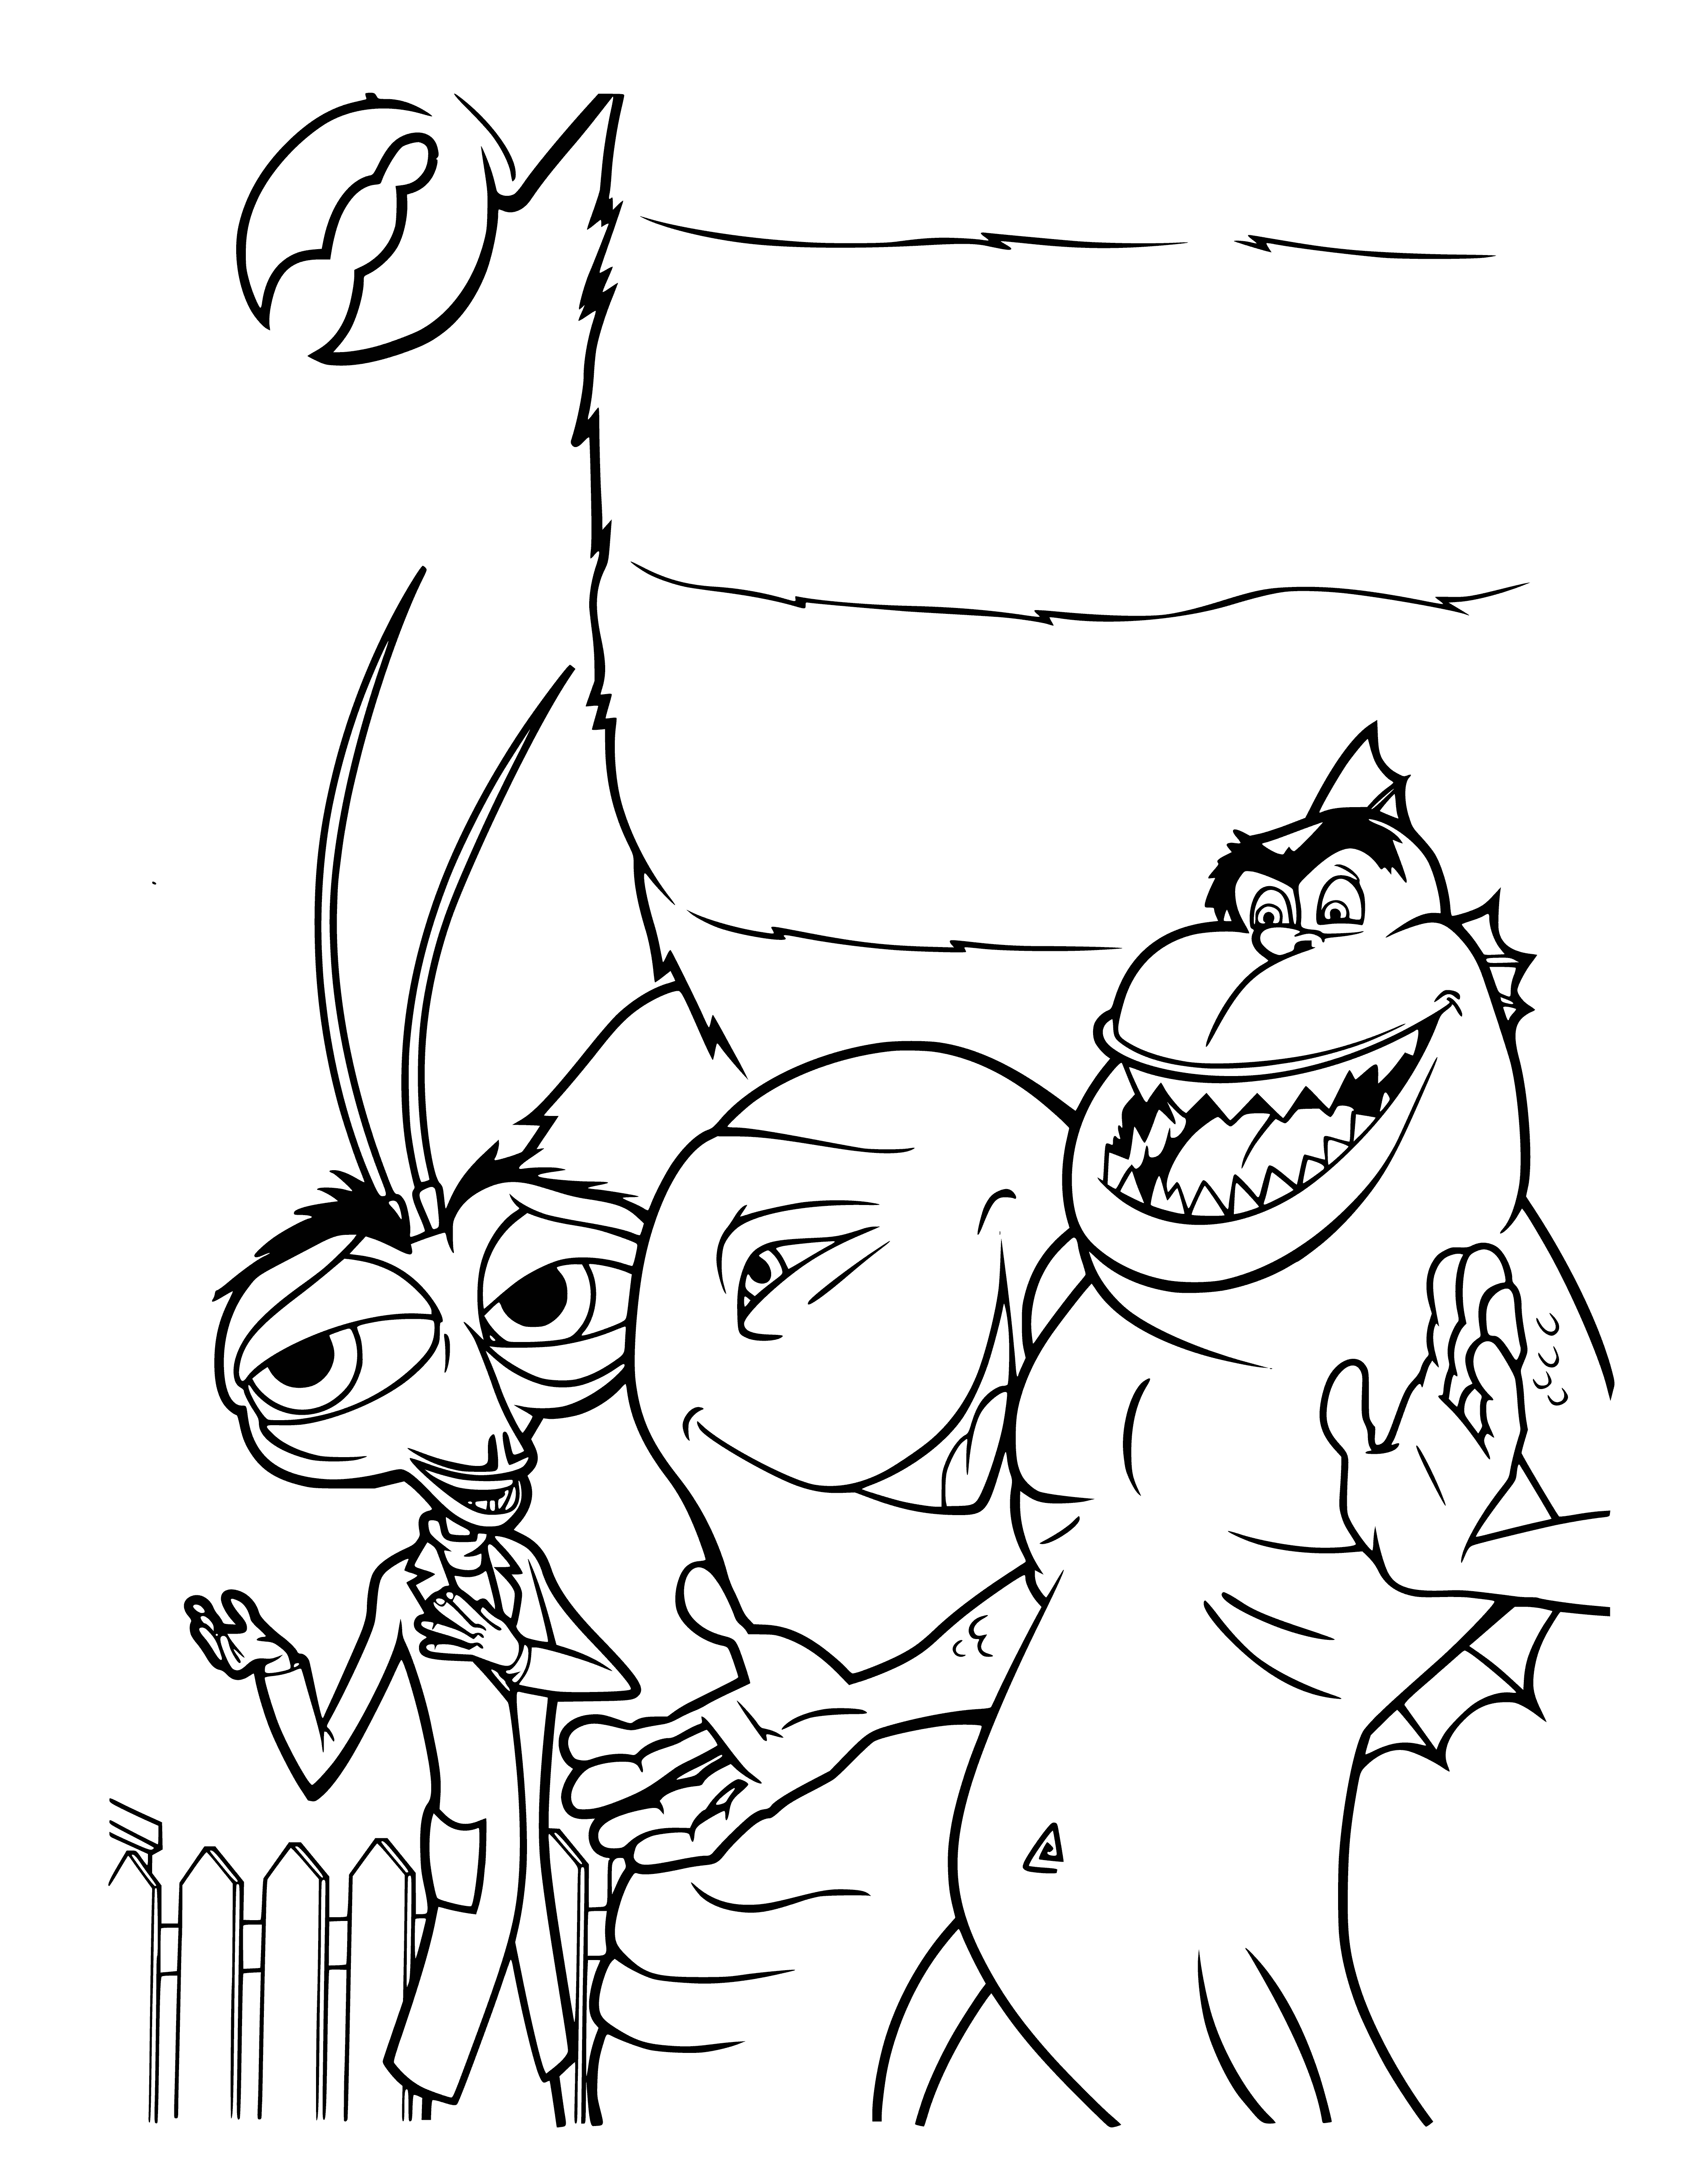 Susan's new friends coloring page